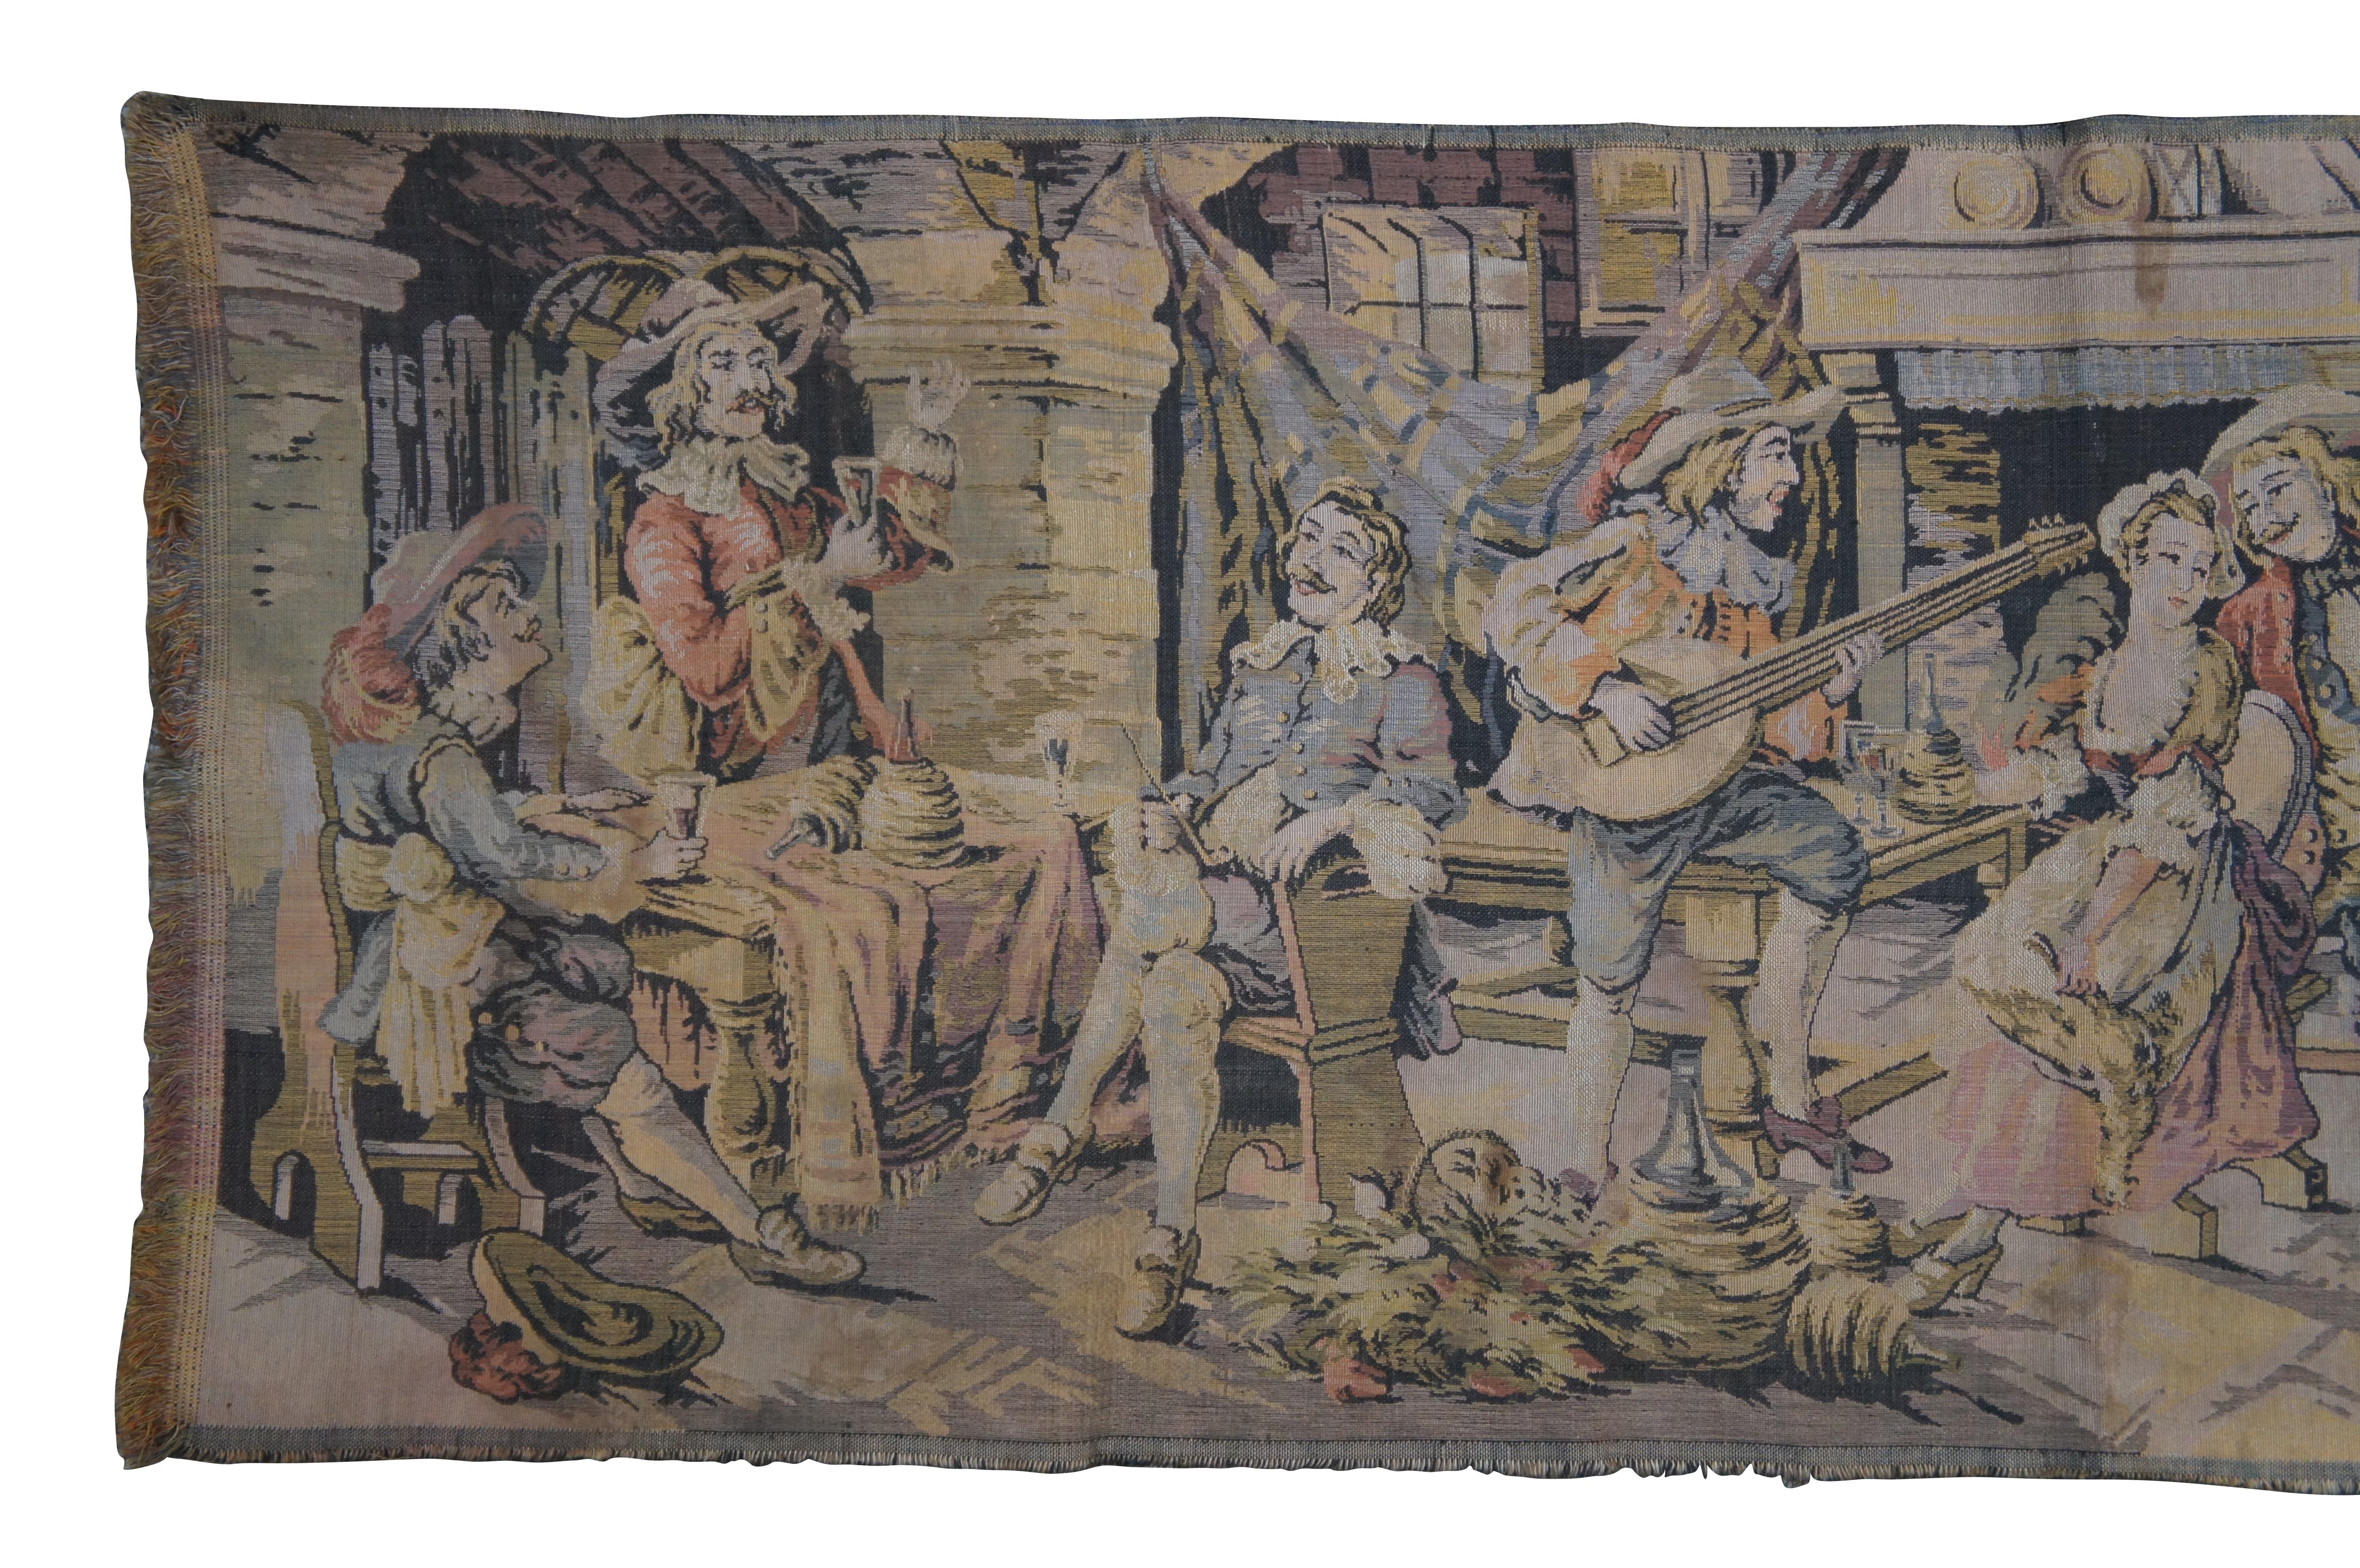 Vintage Belgium woven tavern theme tapestry featuring a Flemish pub scene with men and women (and dog) eating, drinking, smoking and singing.

Dimensions:
55